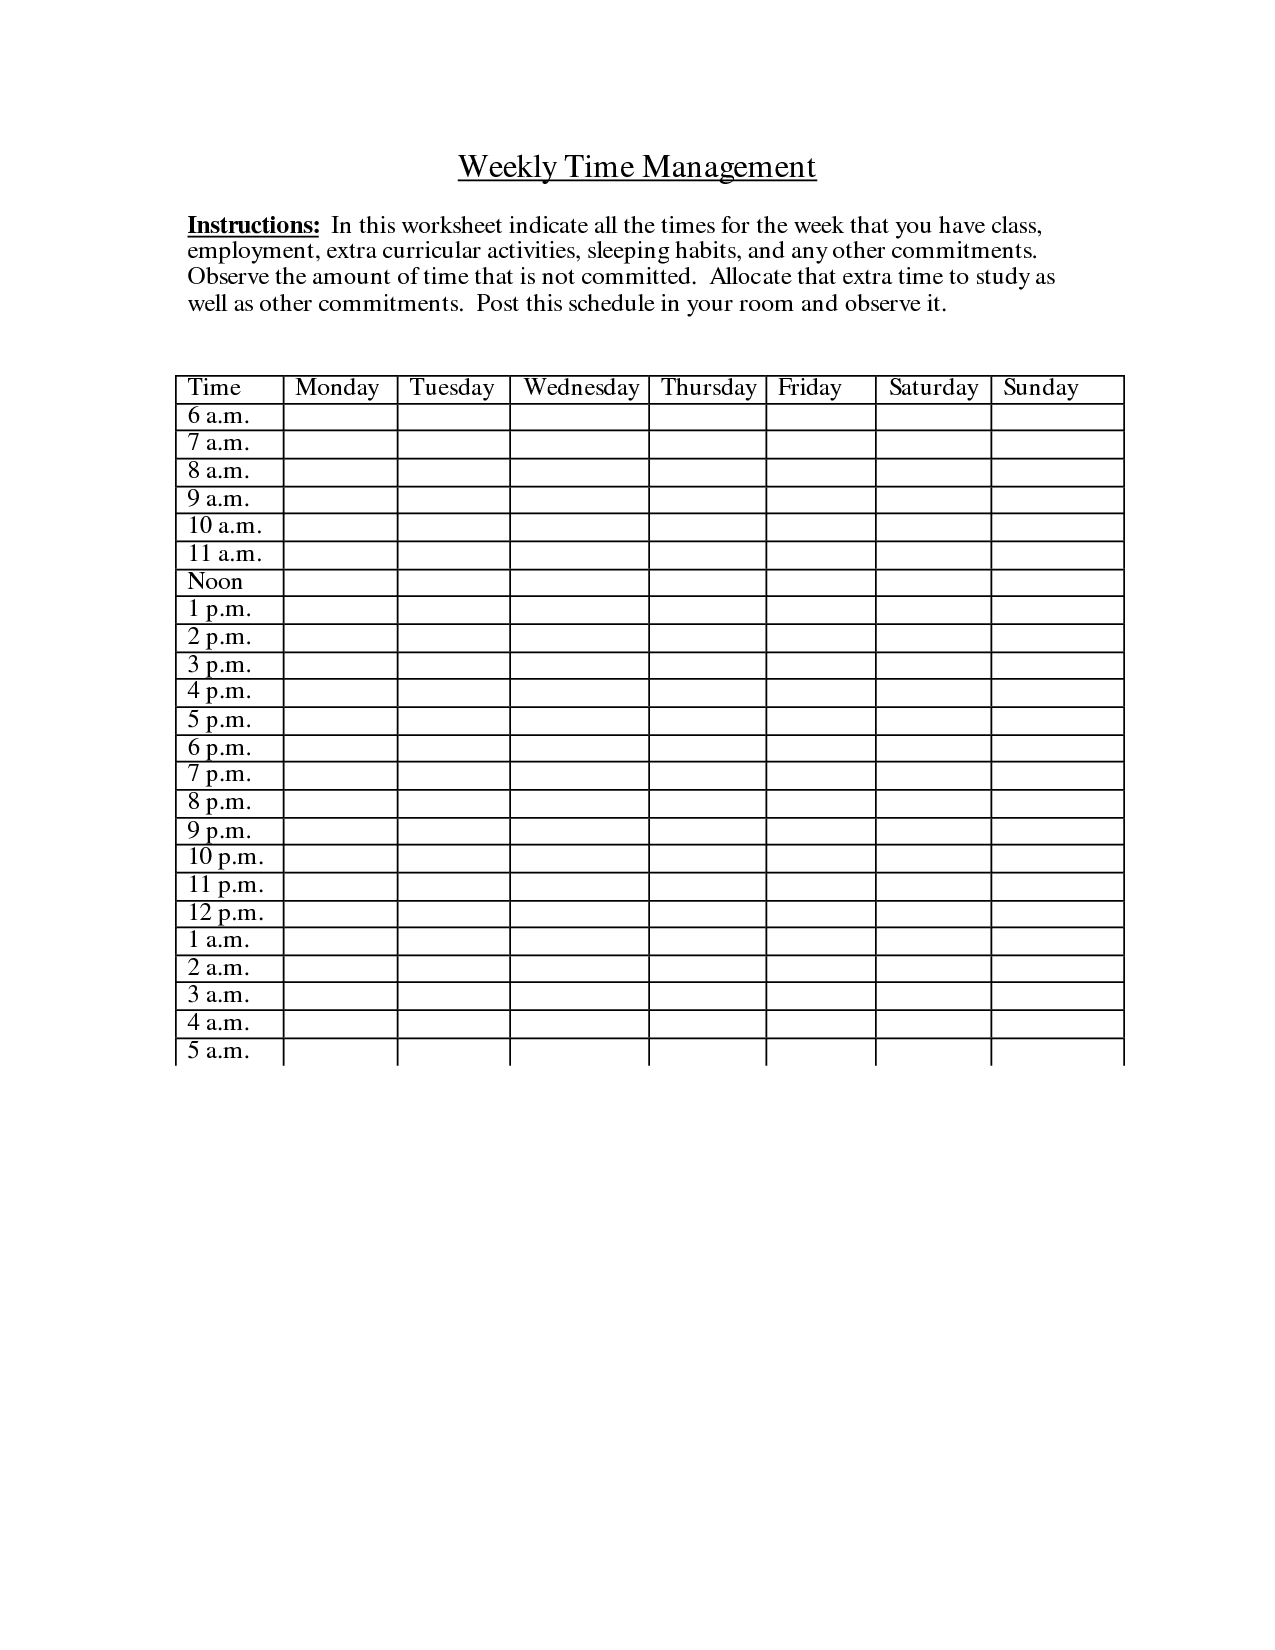 15 Best Images of Time Management Worksheet - Weekly Time ...